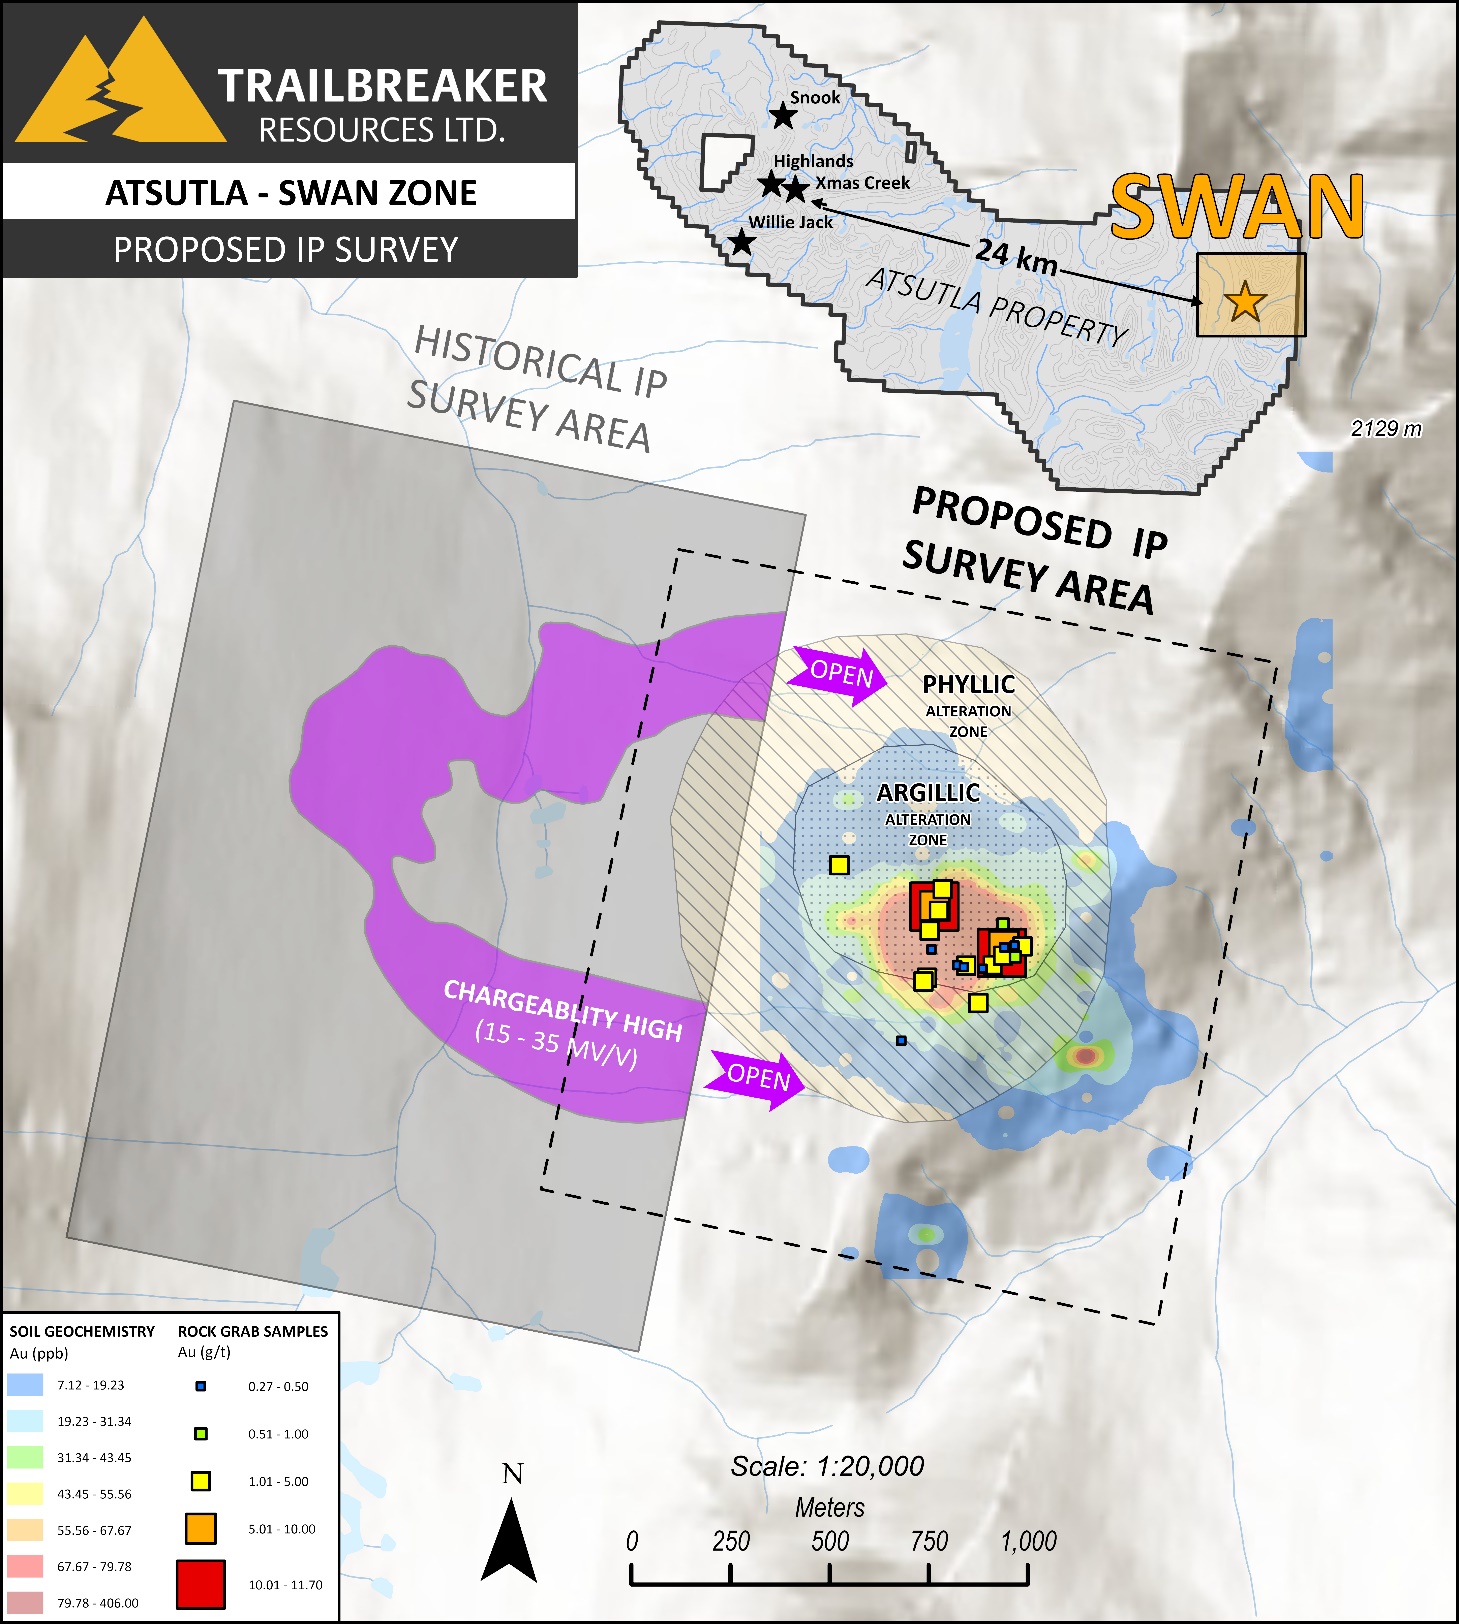 Highlights of the Swan target include the strong Au geochemical anomaly, phyllic and argillic alteration zones, and the partial chargeability high ring feature defined from a historic IP survey.